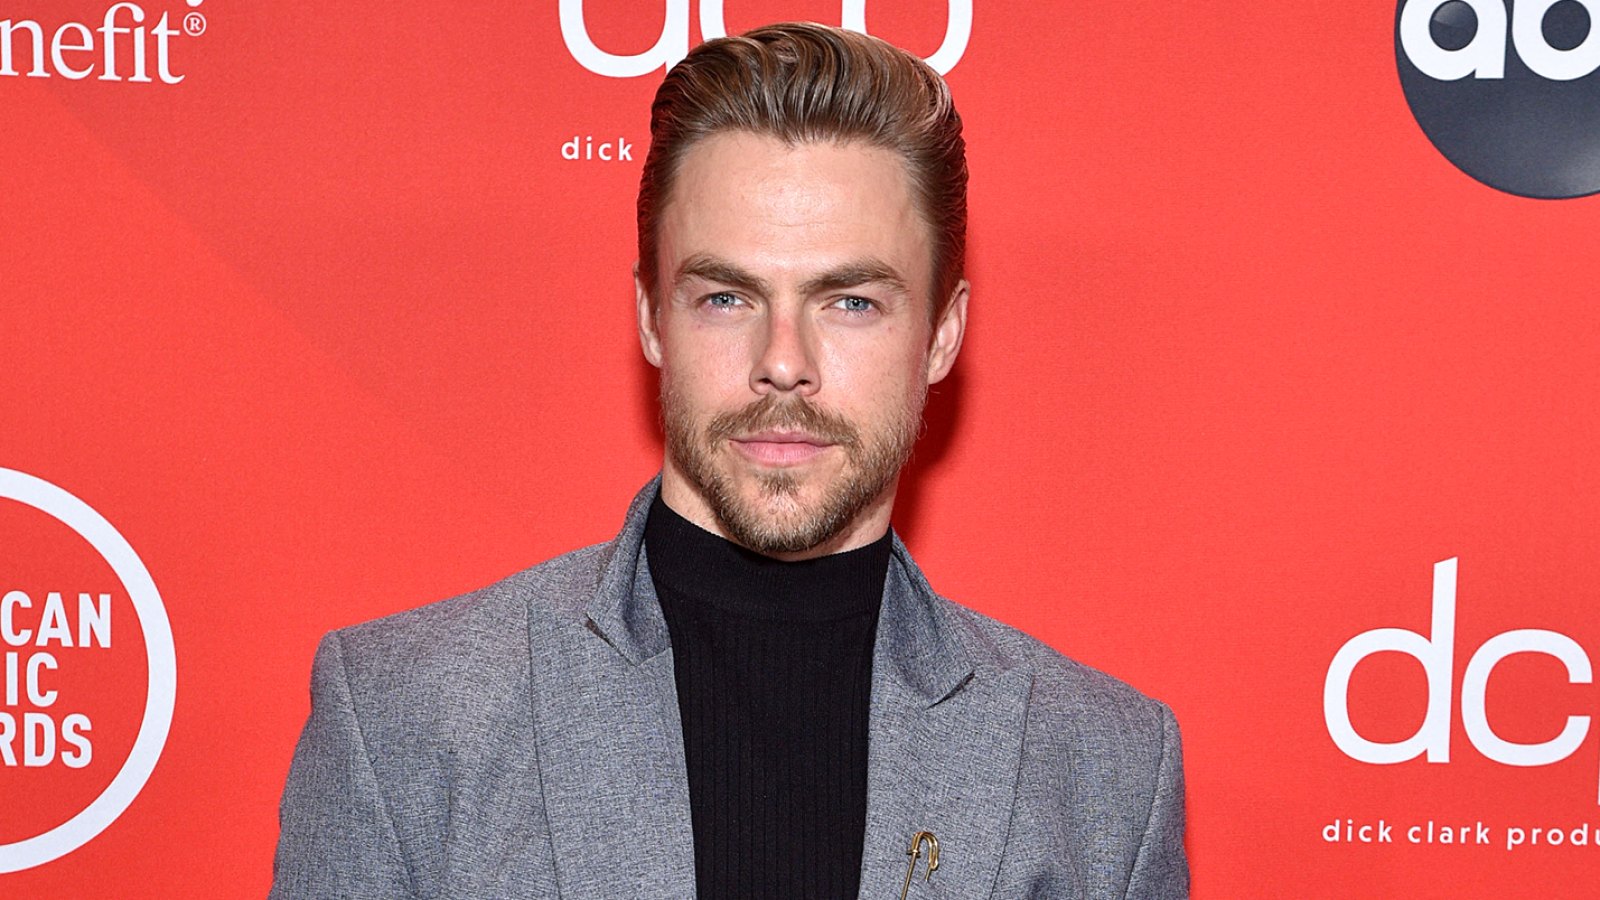 Derek Hough Reveals the ‘Only Time’ He Regretted His ‘DWTS’ Outfit: ‘My Pants Cut Off the Circulation to My Brain’ 